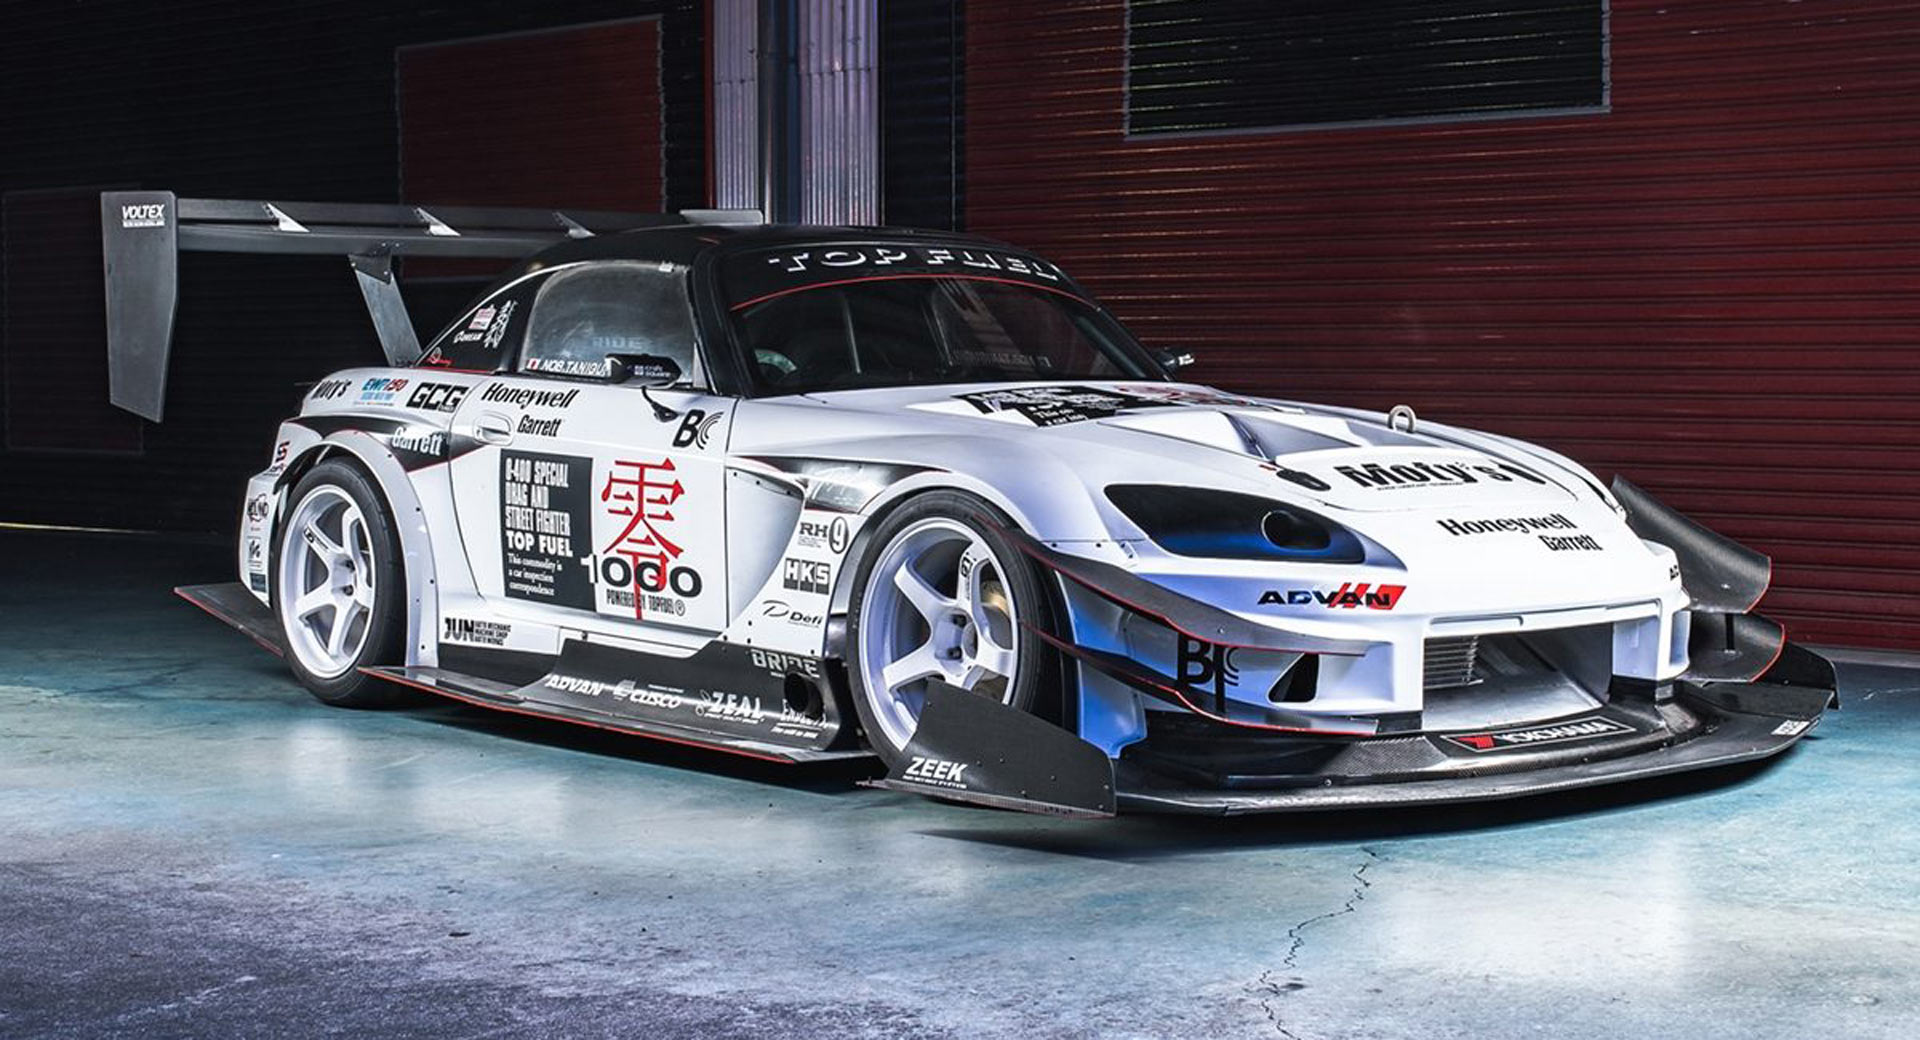 Top Fuel Honda S00 Type Rr Is A Time Attack Monster With Almost 1 000 Hp Carscoops